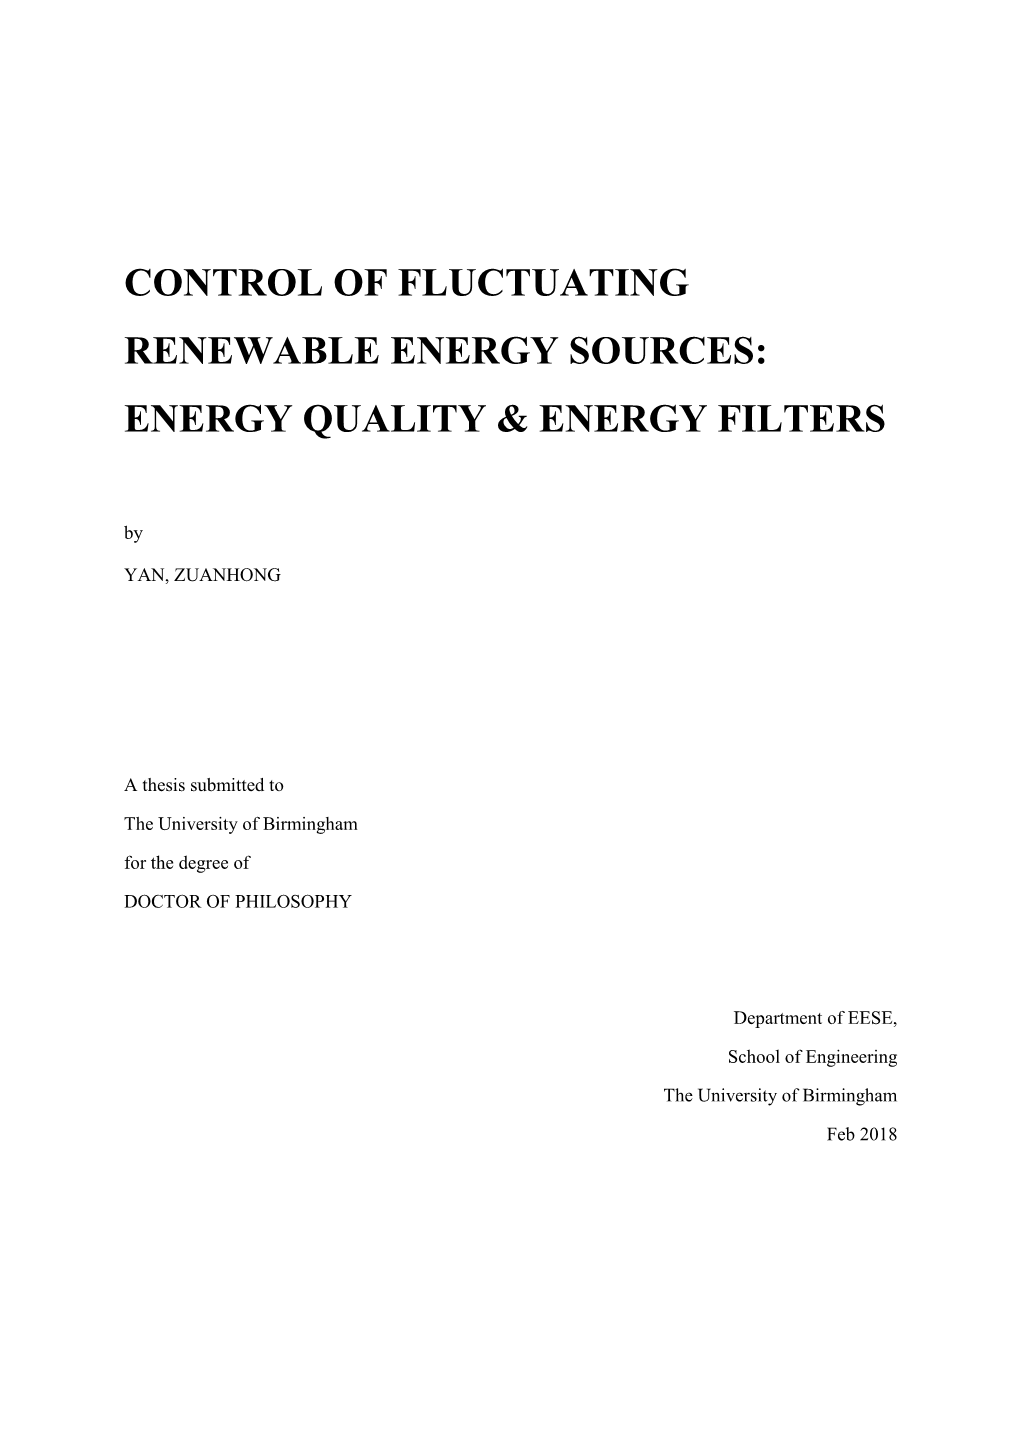 Control of Fluctuating Renewable Energy Sources: Energy Quality & Energy Filters